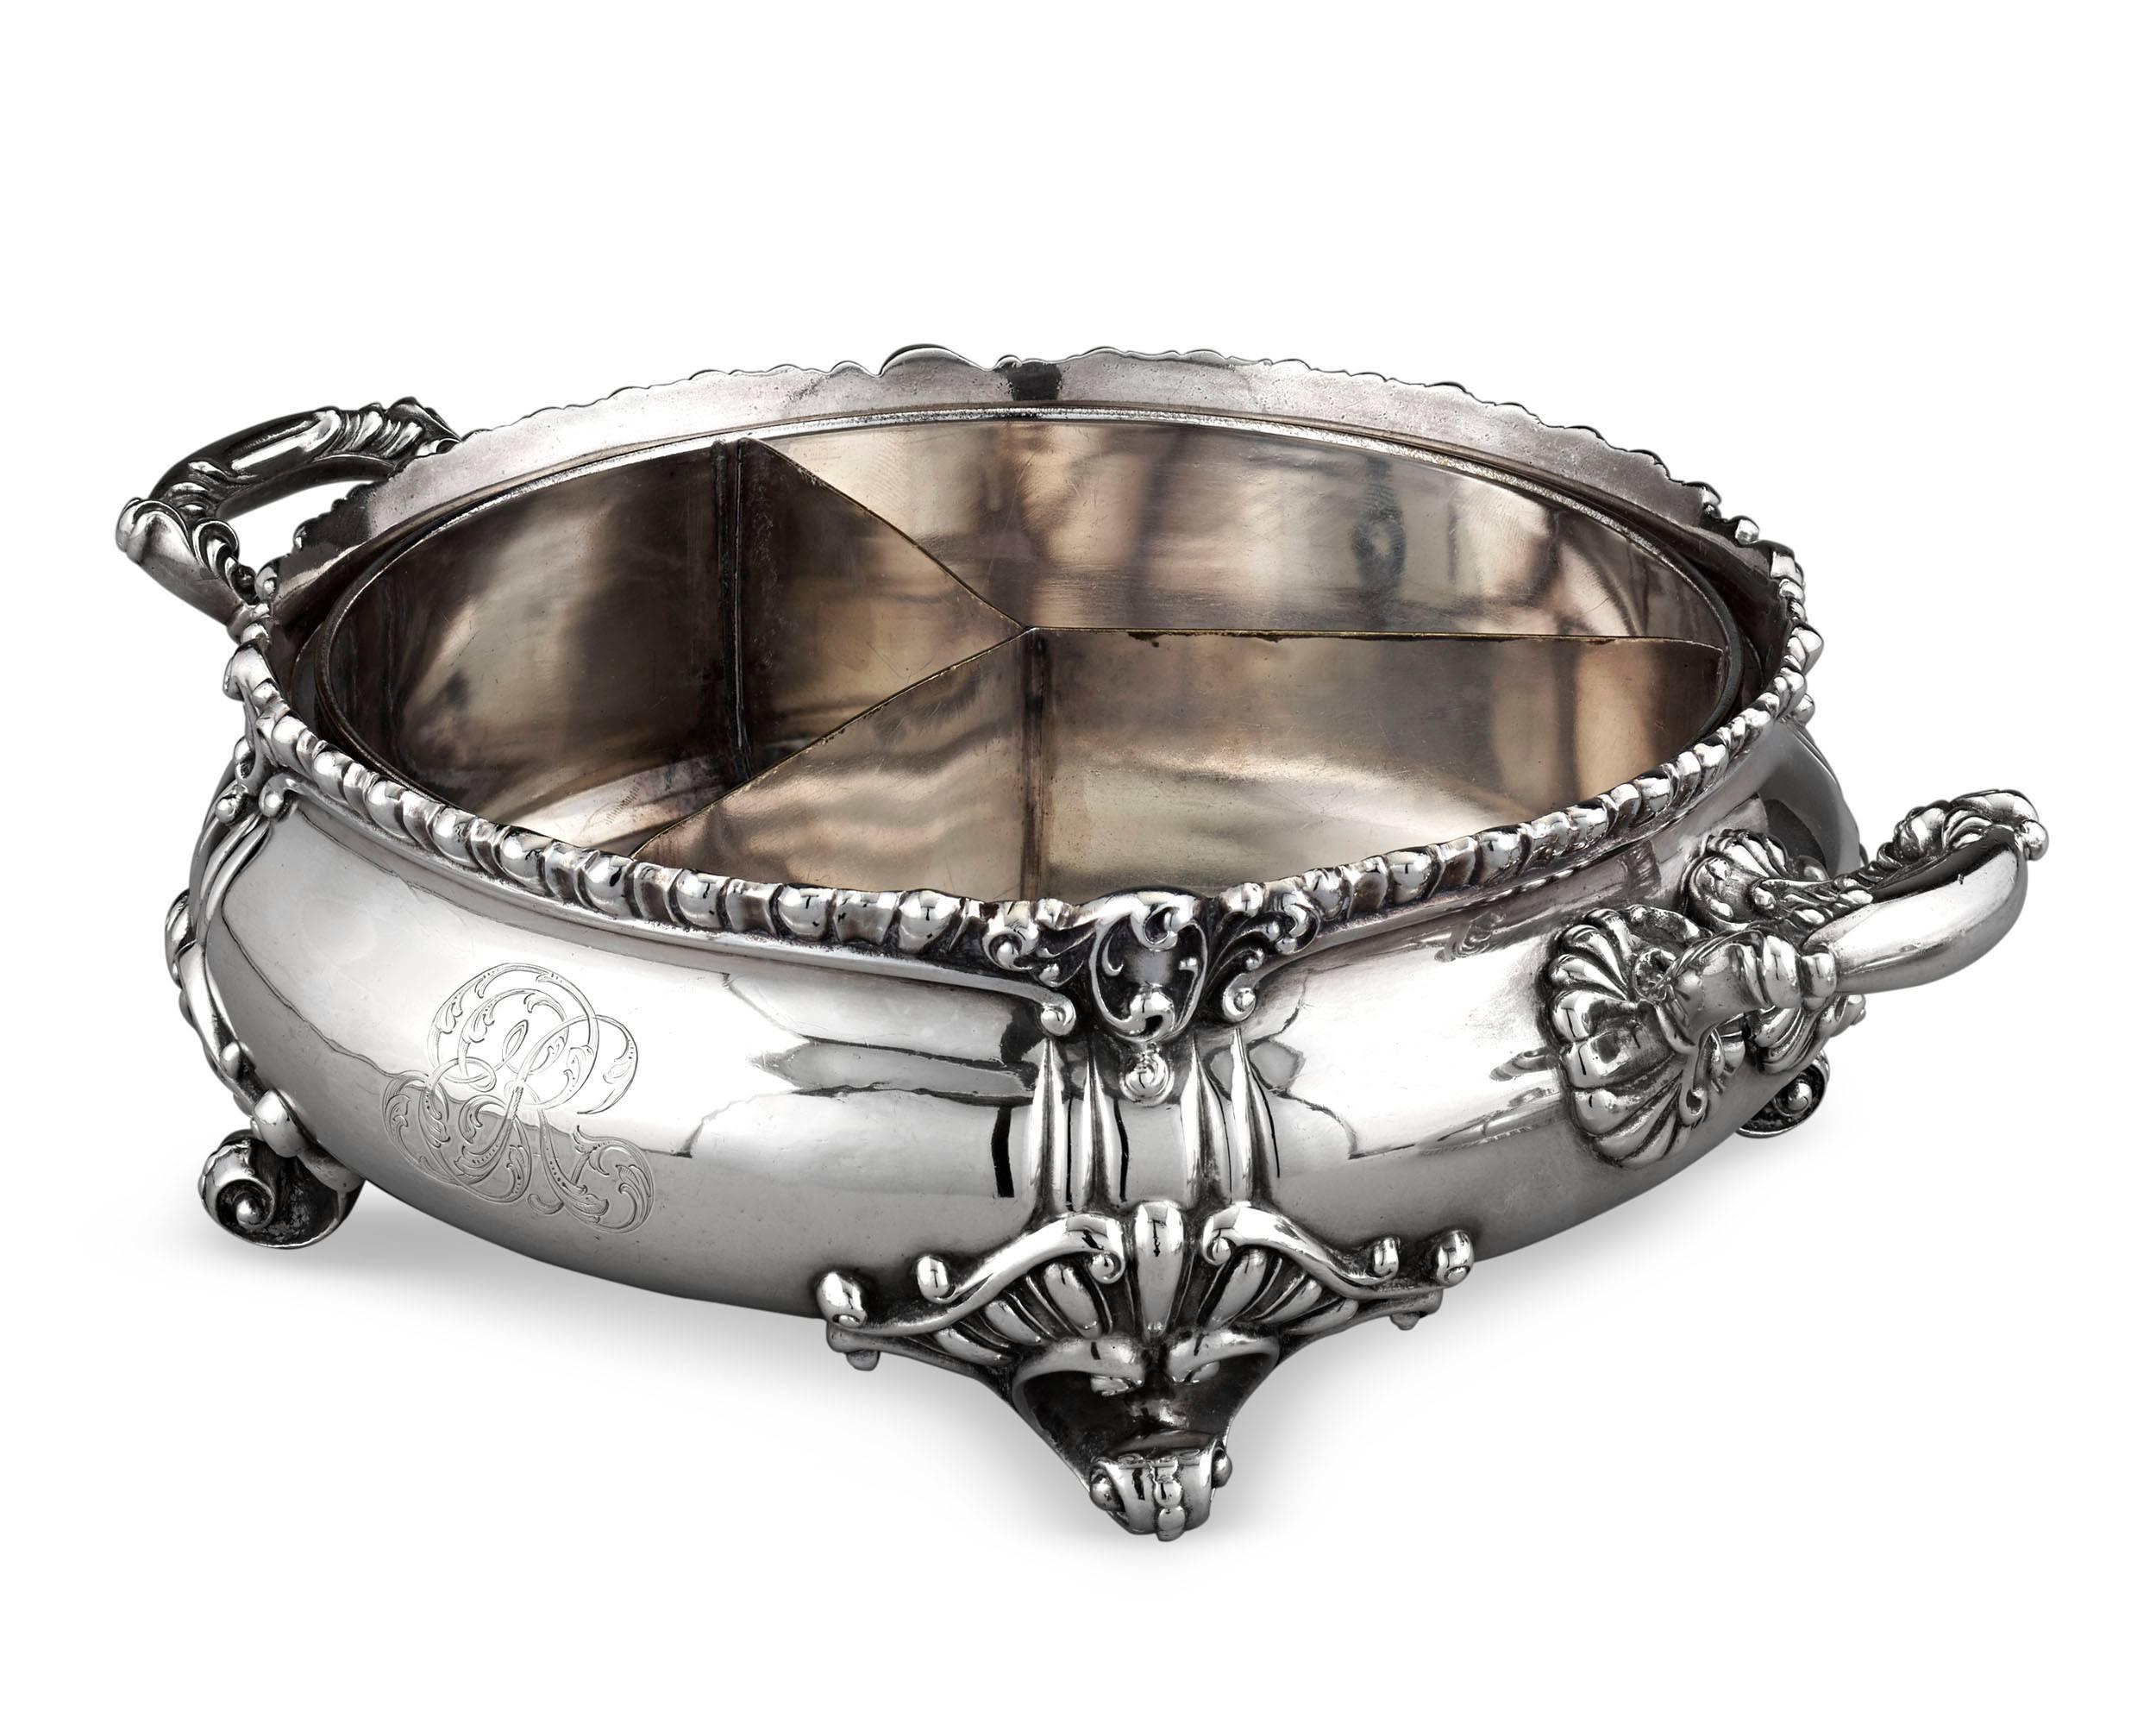 This beautiful silver covered serving dish was crafted by the American silversmithing firm of Theodore B. Starr of New York. Set upon scrolling feet with grand gadroon detailing, this wonderful dish features the variety of robust, Baroque-inspired